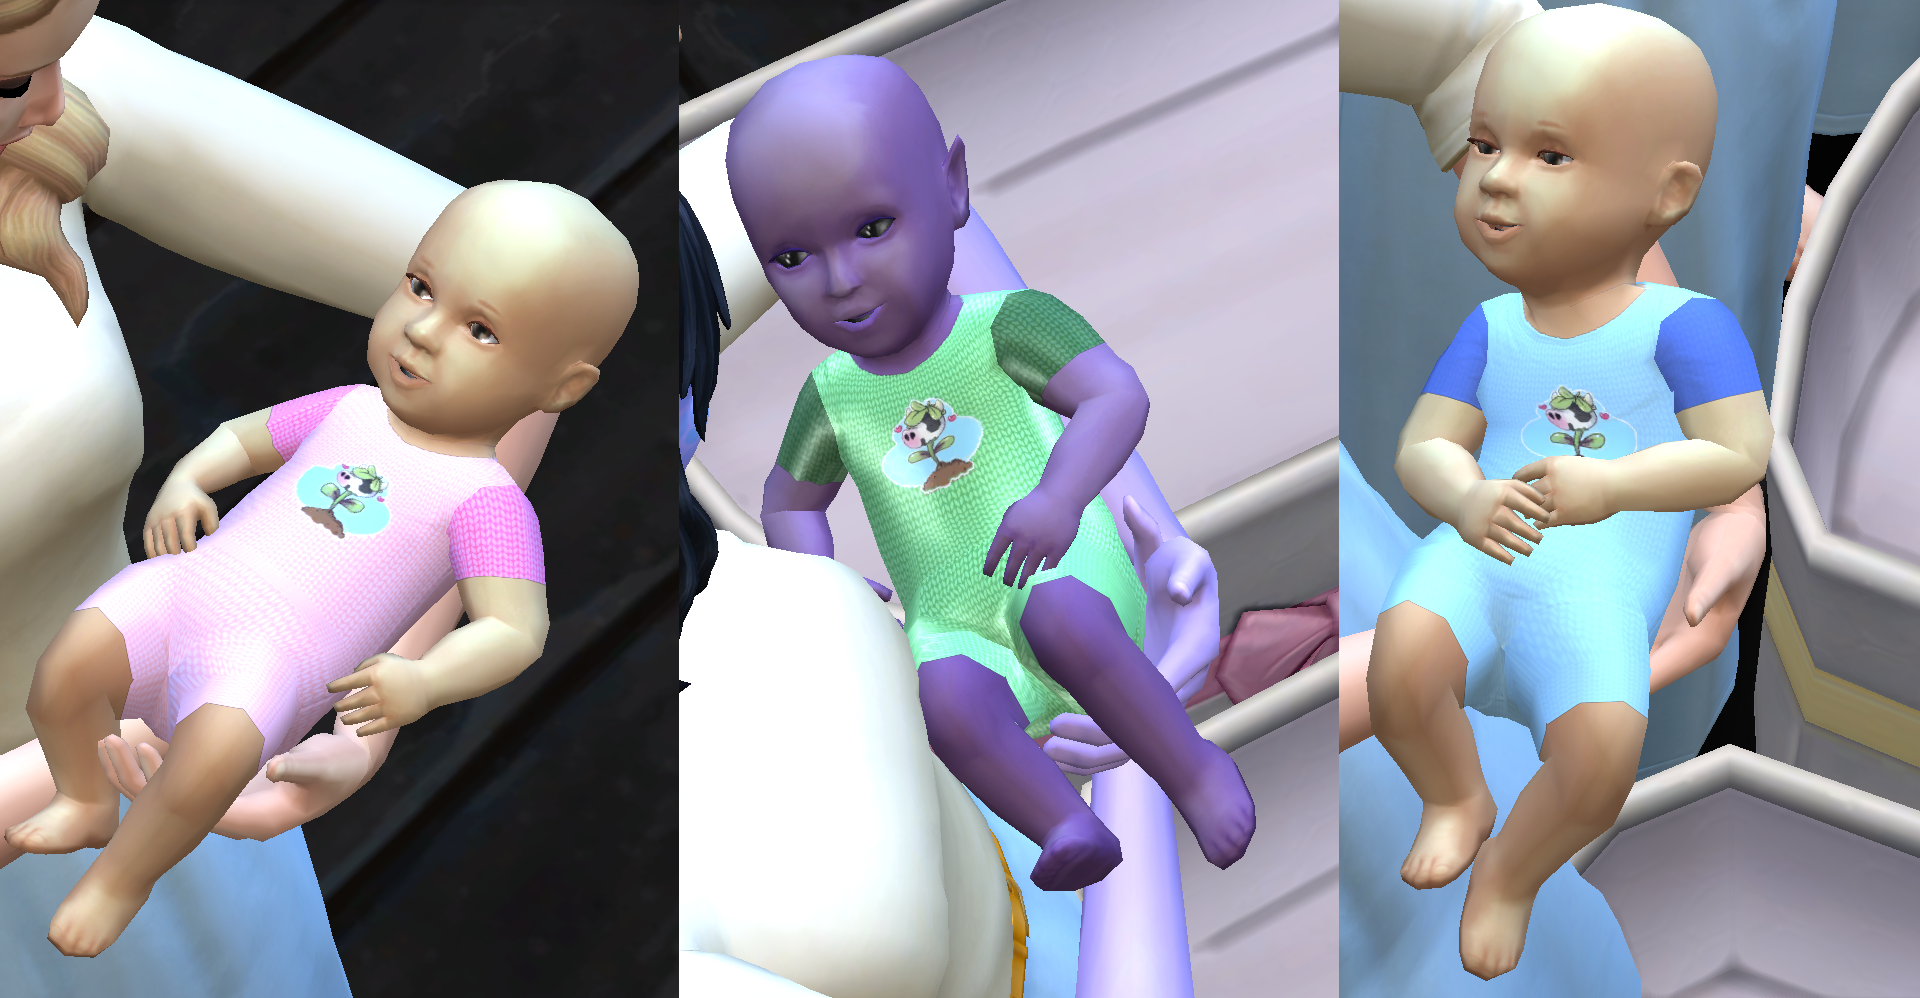 Cowplant summer baby outfit - The Sims 4 Mods - CurseForge